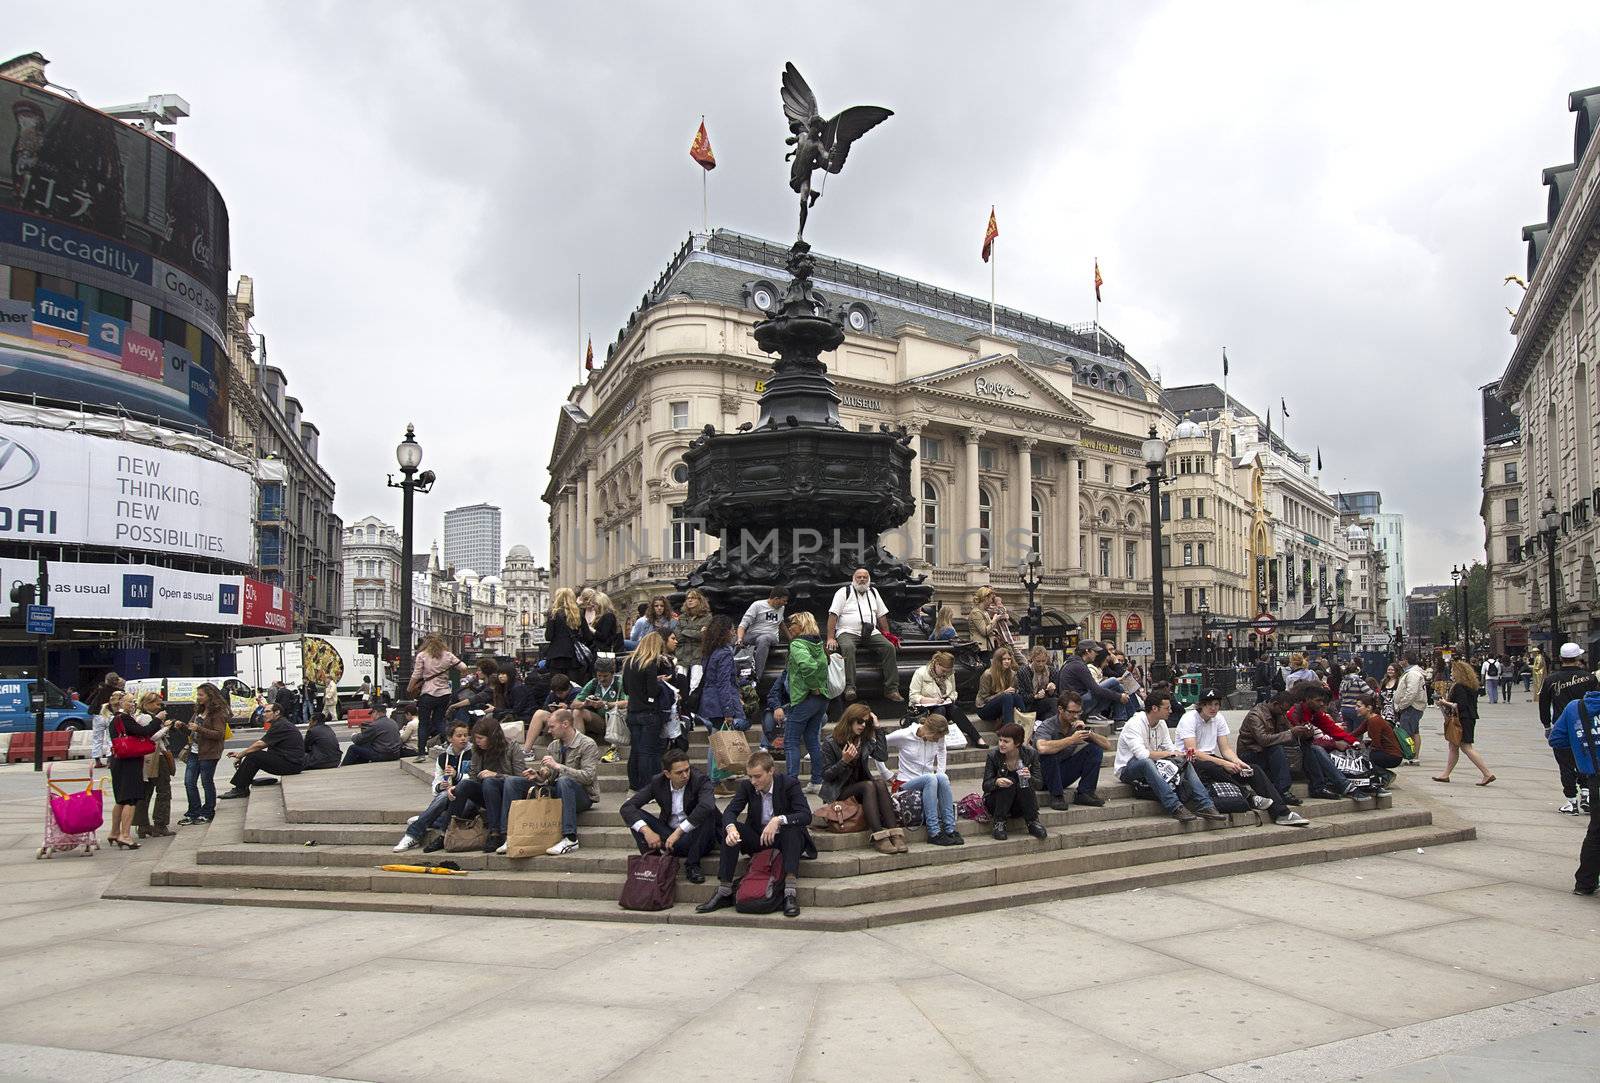 Piccadilly Circus by JanKranendonk